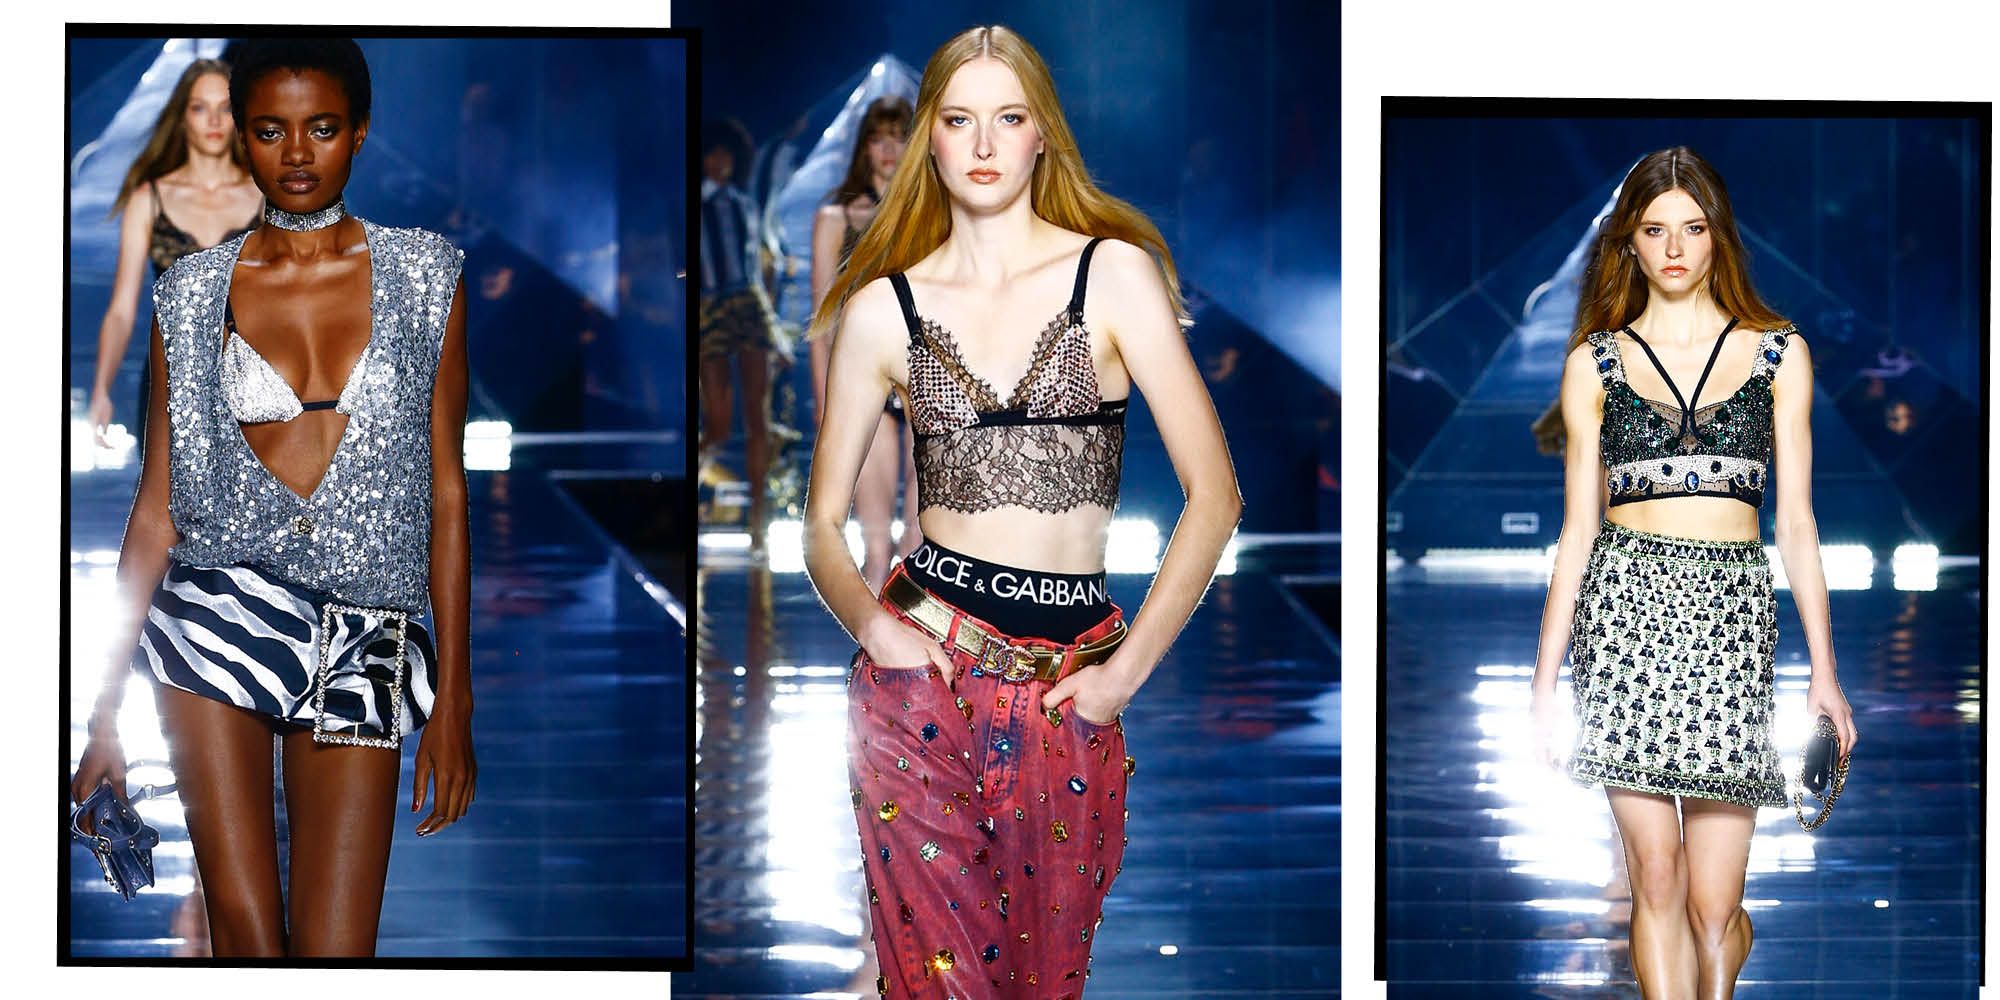 Dolce & Gabbana Is To Furnish Your Out' Wardrobe With The OTT Noughties Looks Deserve